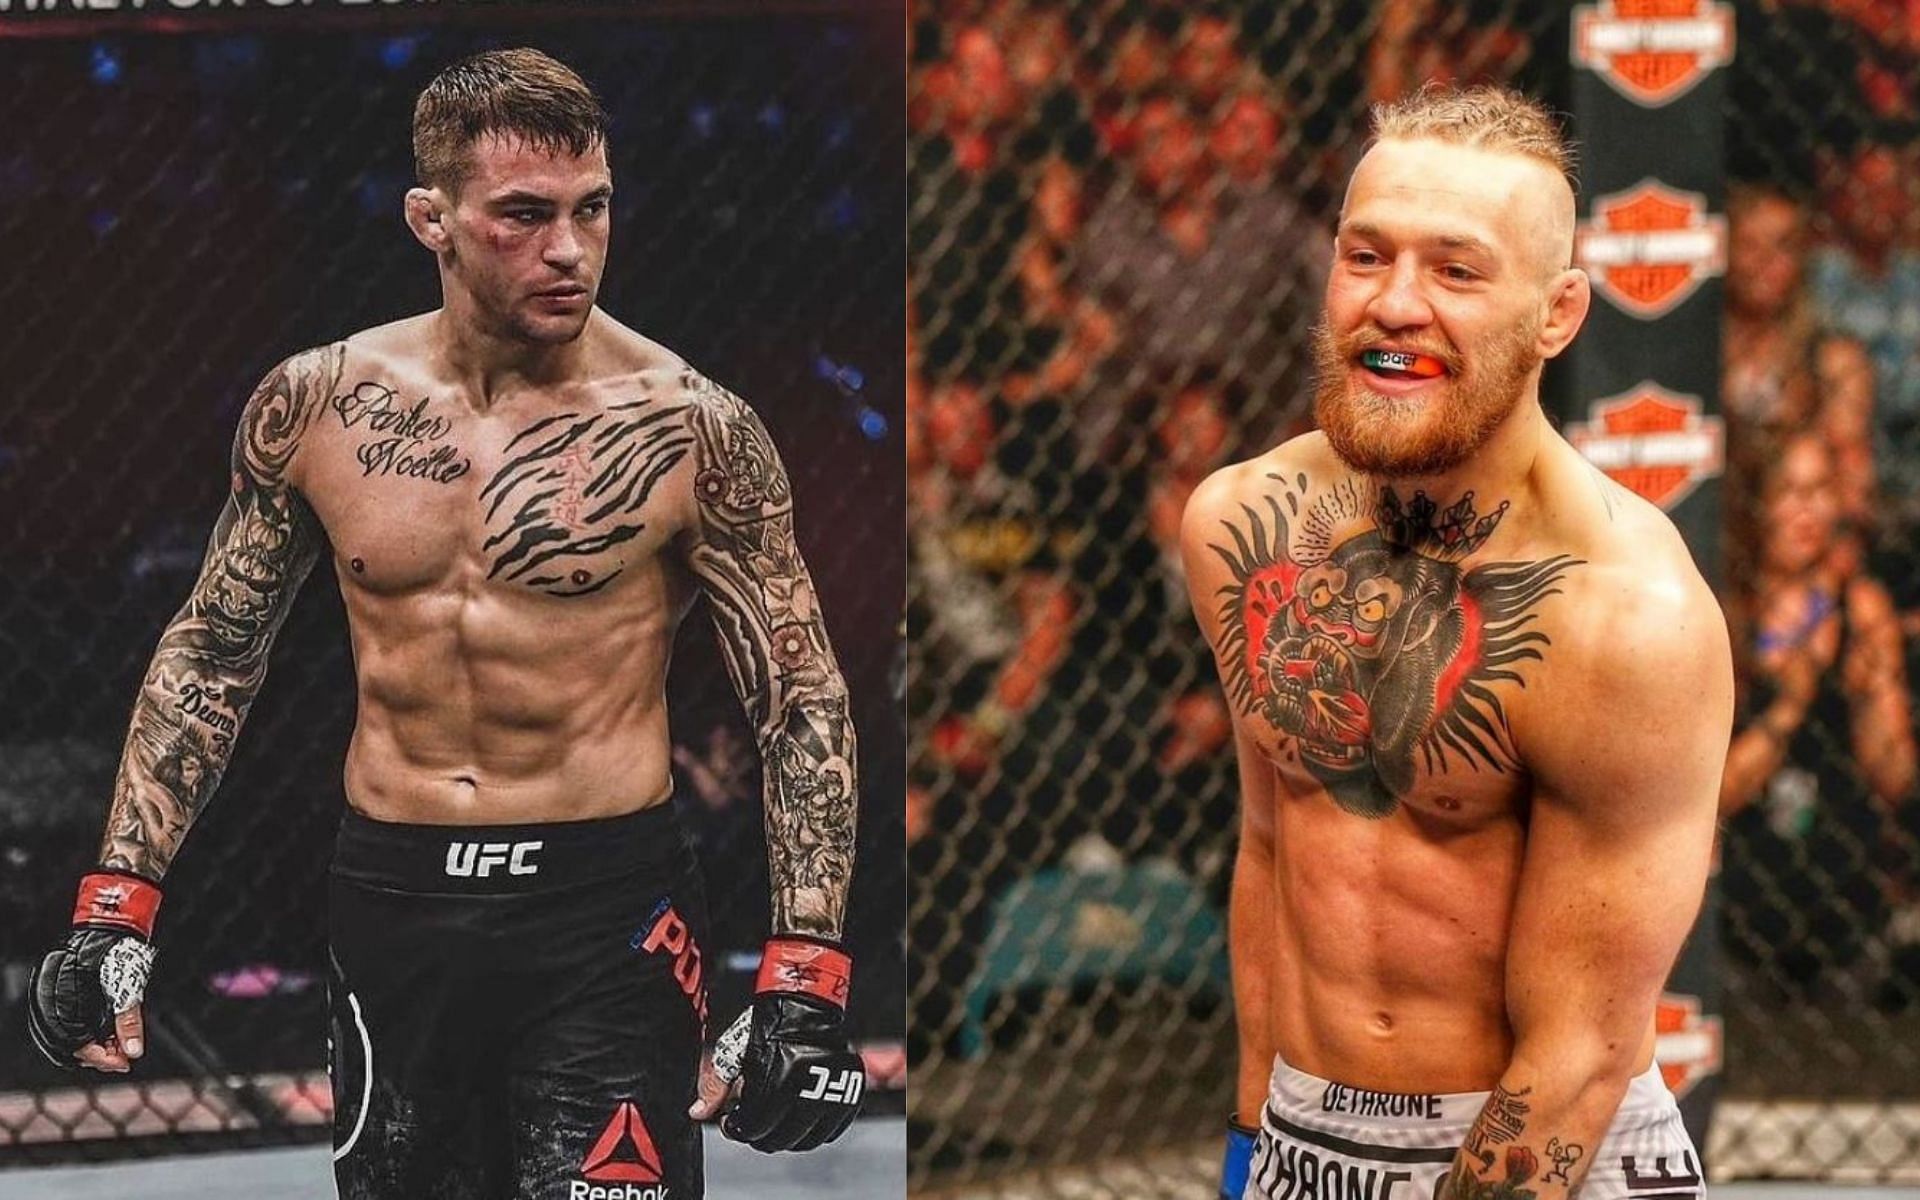 Dustin Poirier (left) shoots down hopes of another fight with Conor McGregor (right). [Image credit: @dustinpoirier and @thenotoriousmma on Instagram]